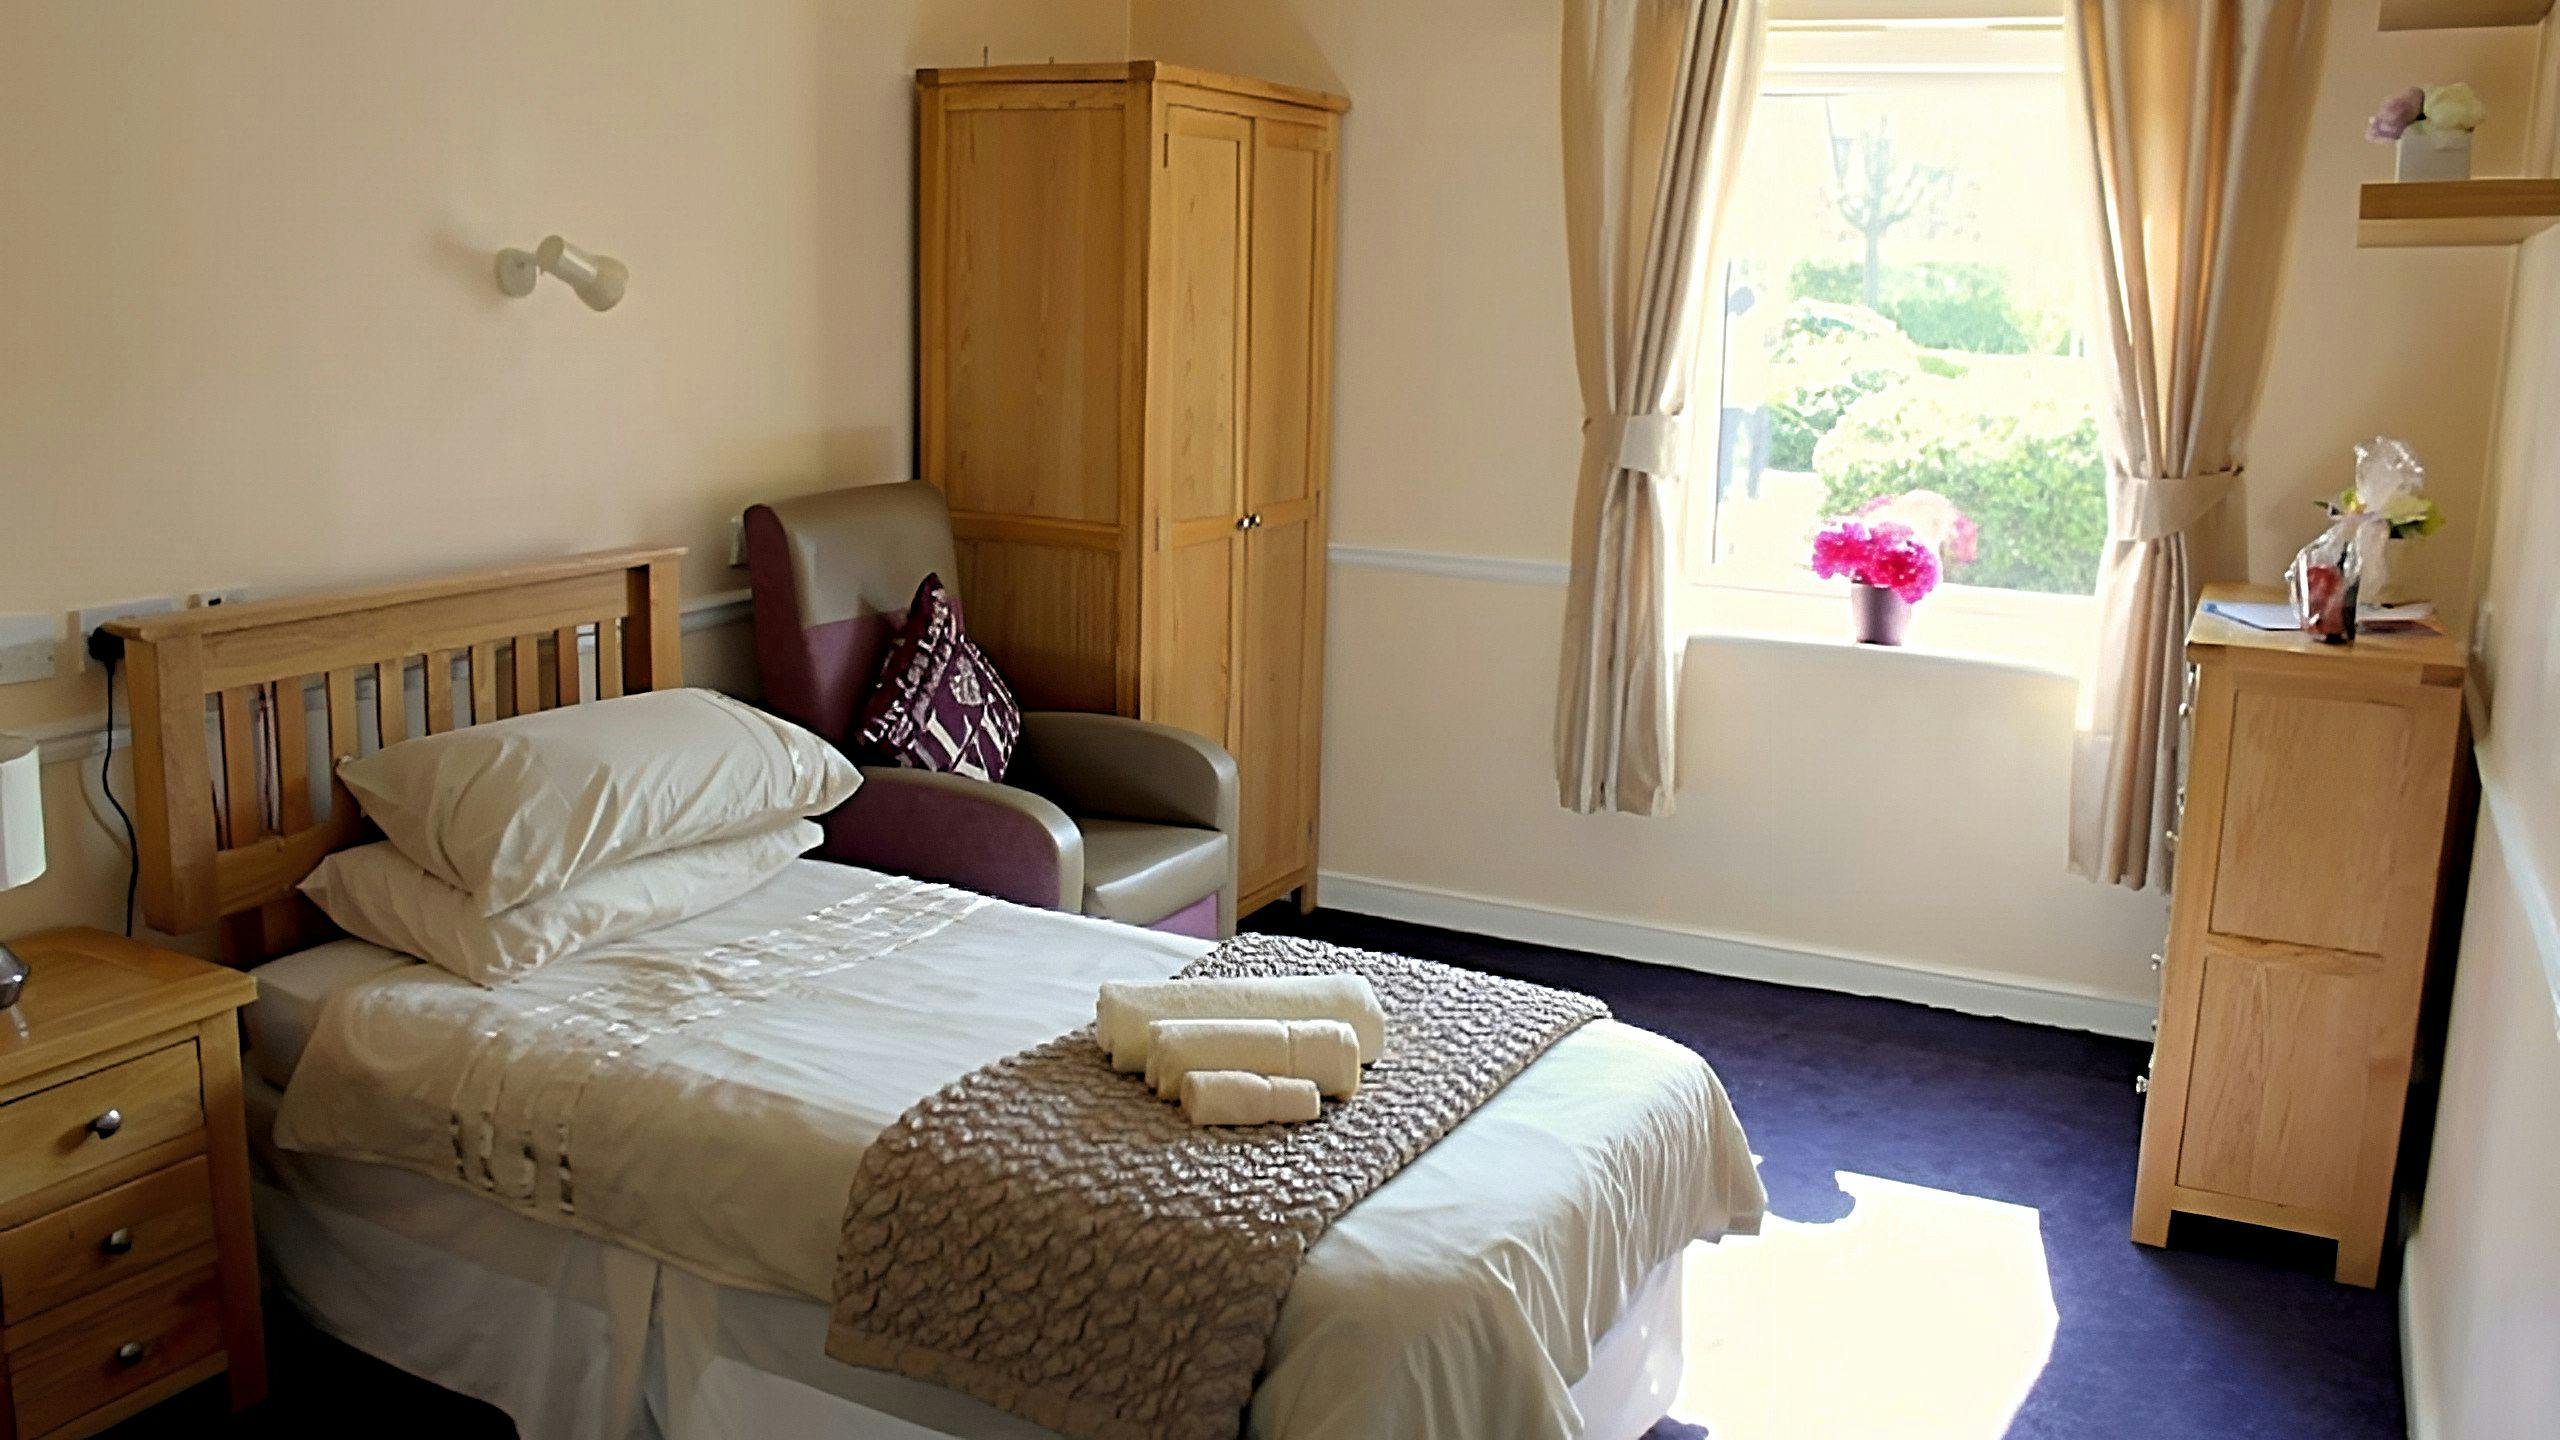 Countrywide - Earsdon Grange care home 2